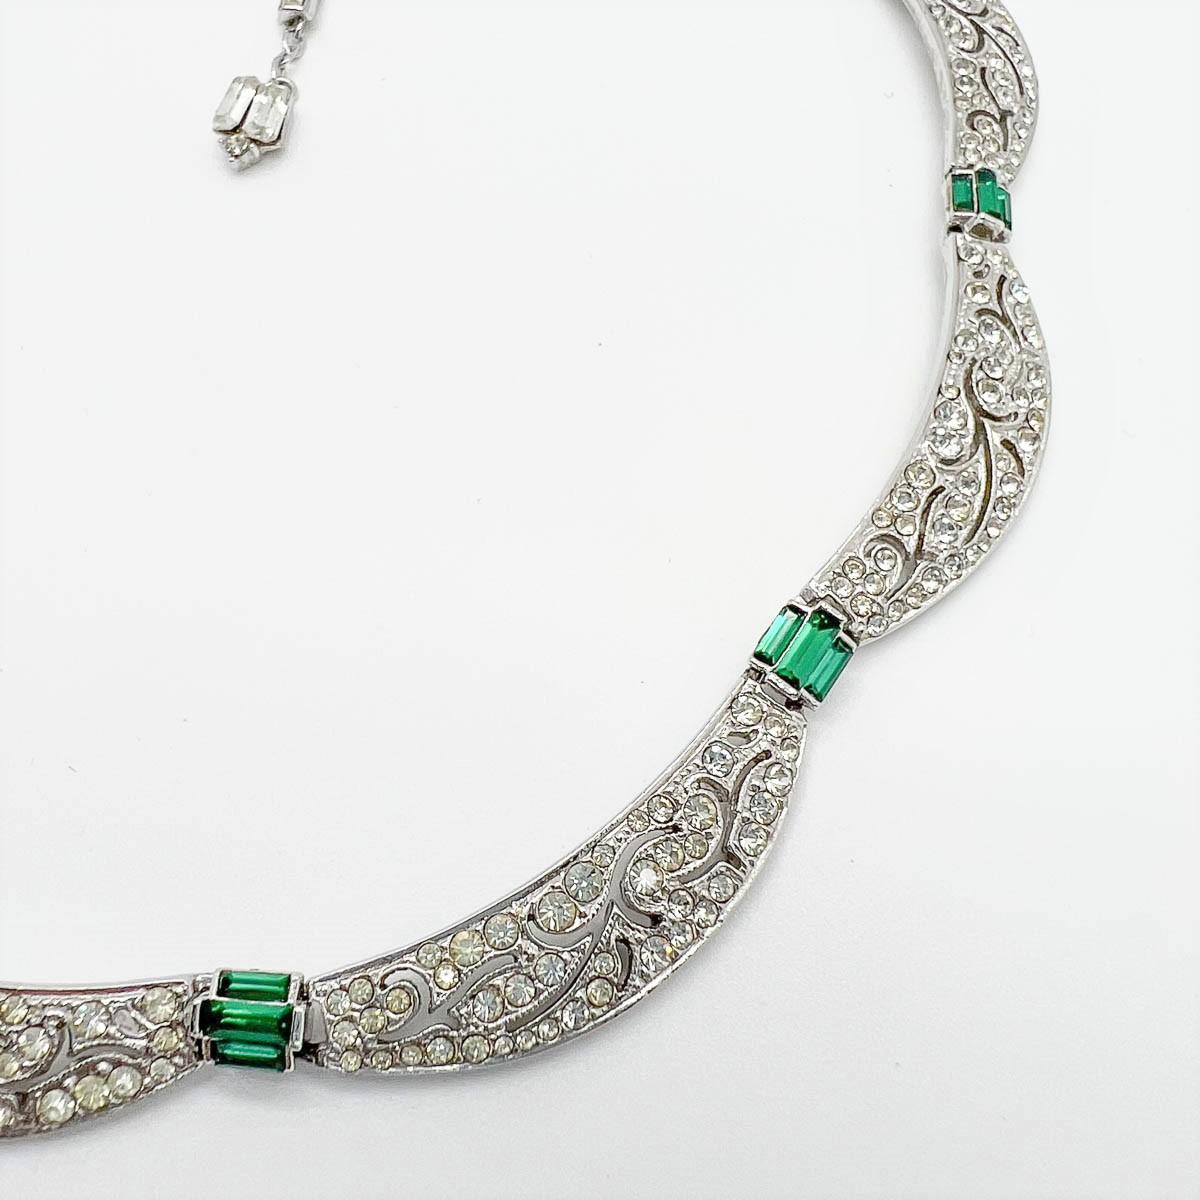 Vintage Art Deco Inspired Emerald Crystal Necklace 1940s In Good Condition For Sale In Wilmslow, GB